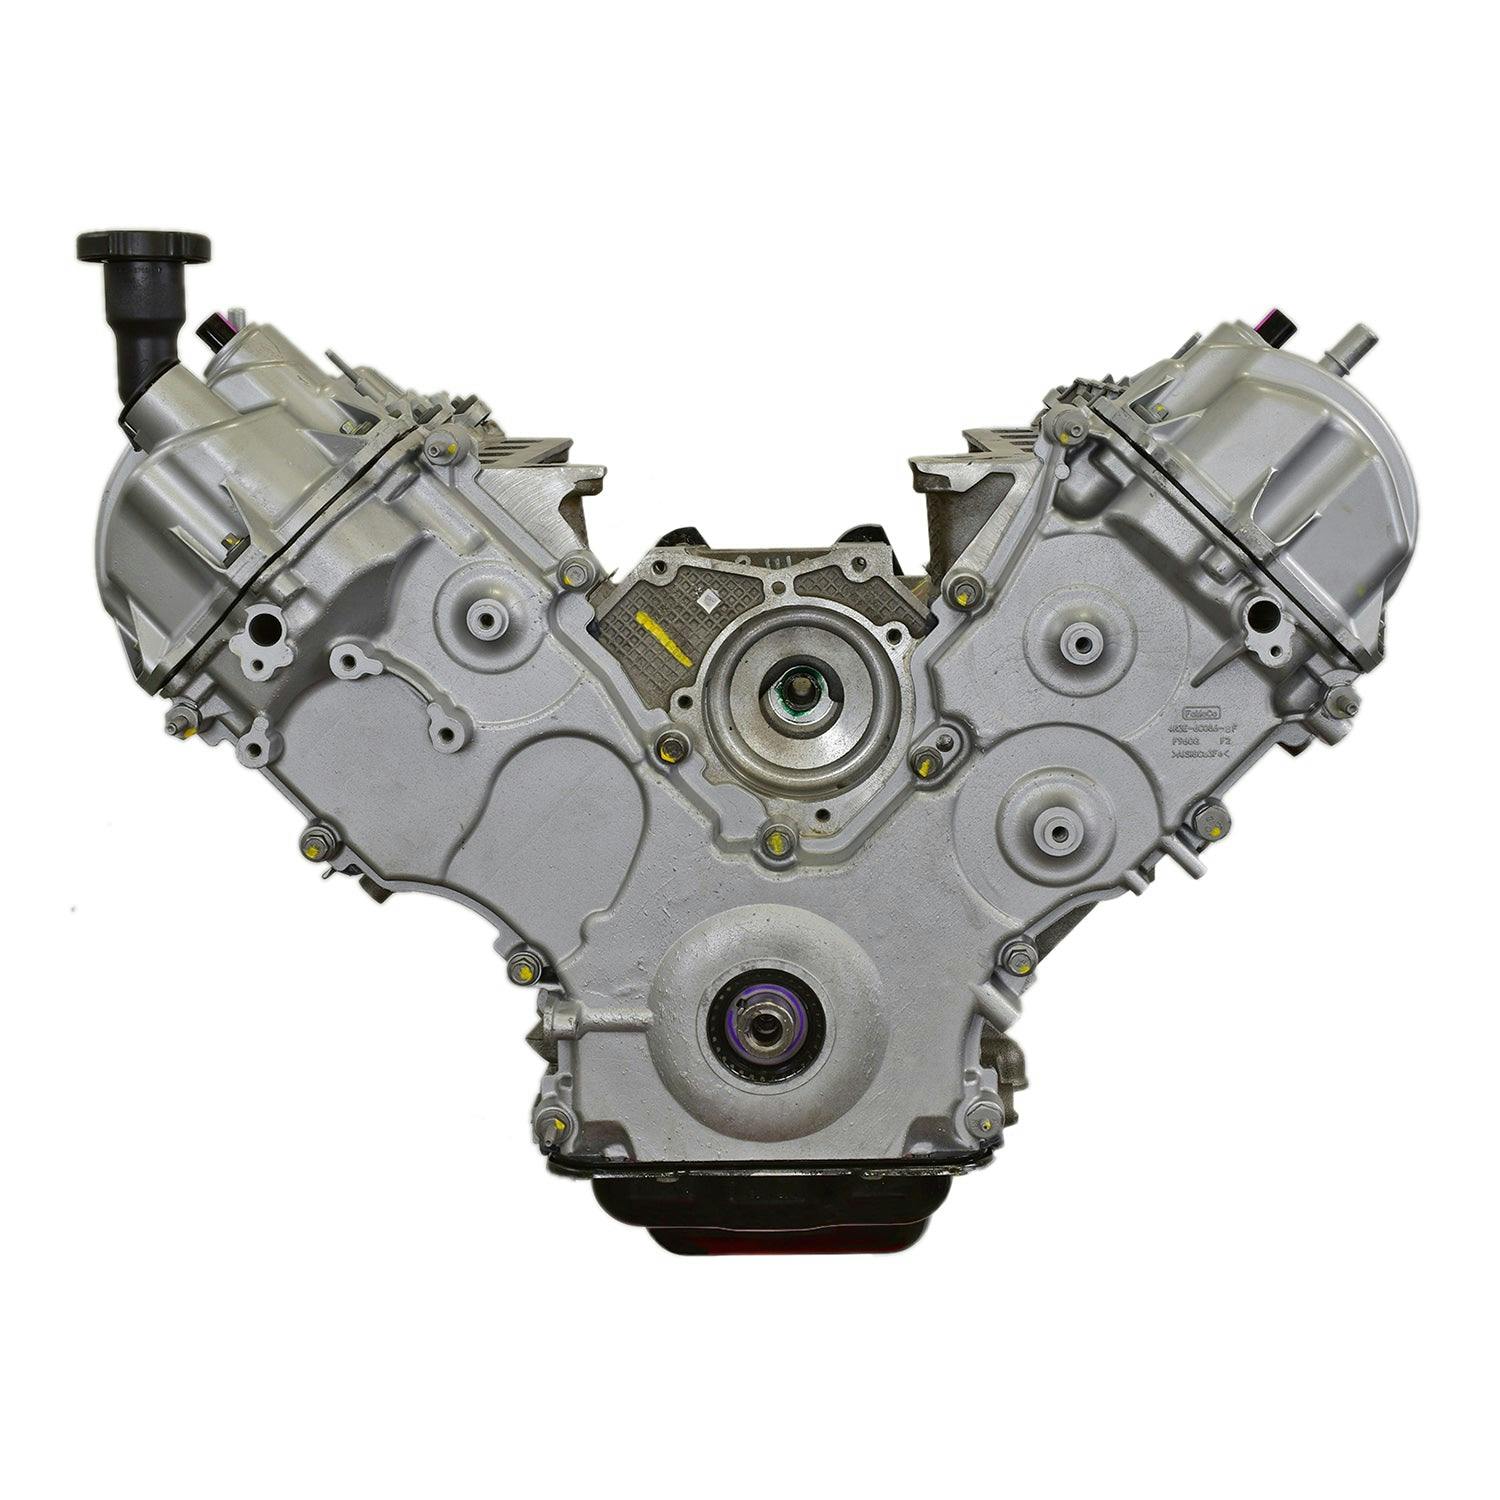 4.6L V8 Engine for 2005-2008 Ford Mustang